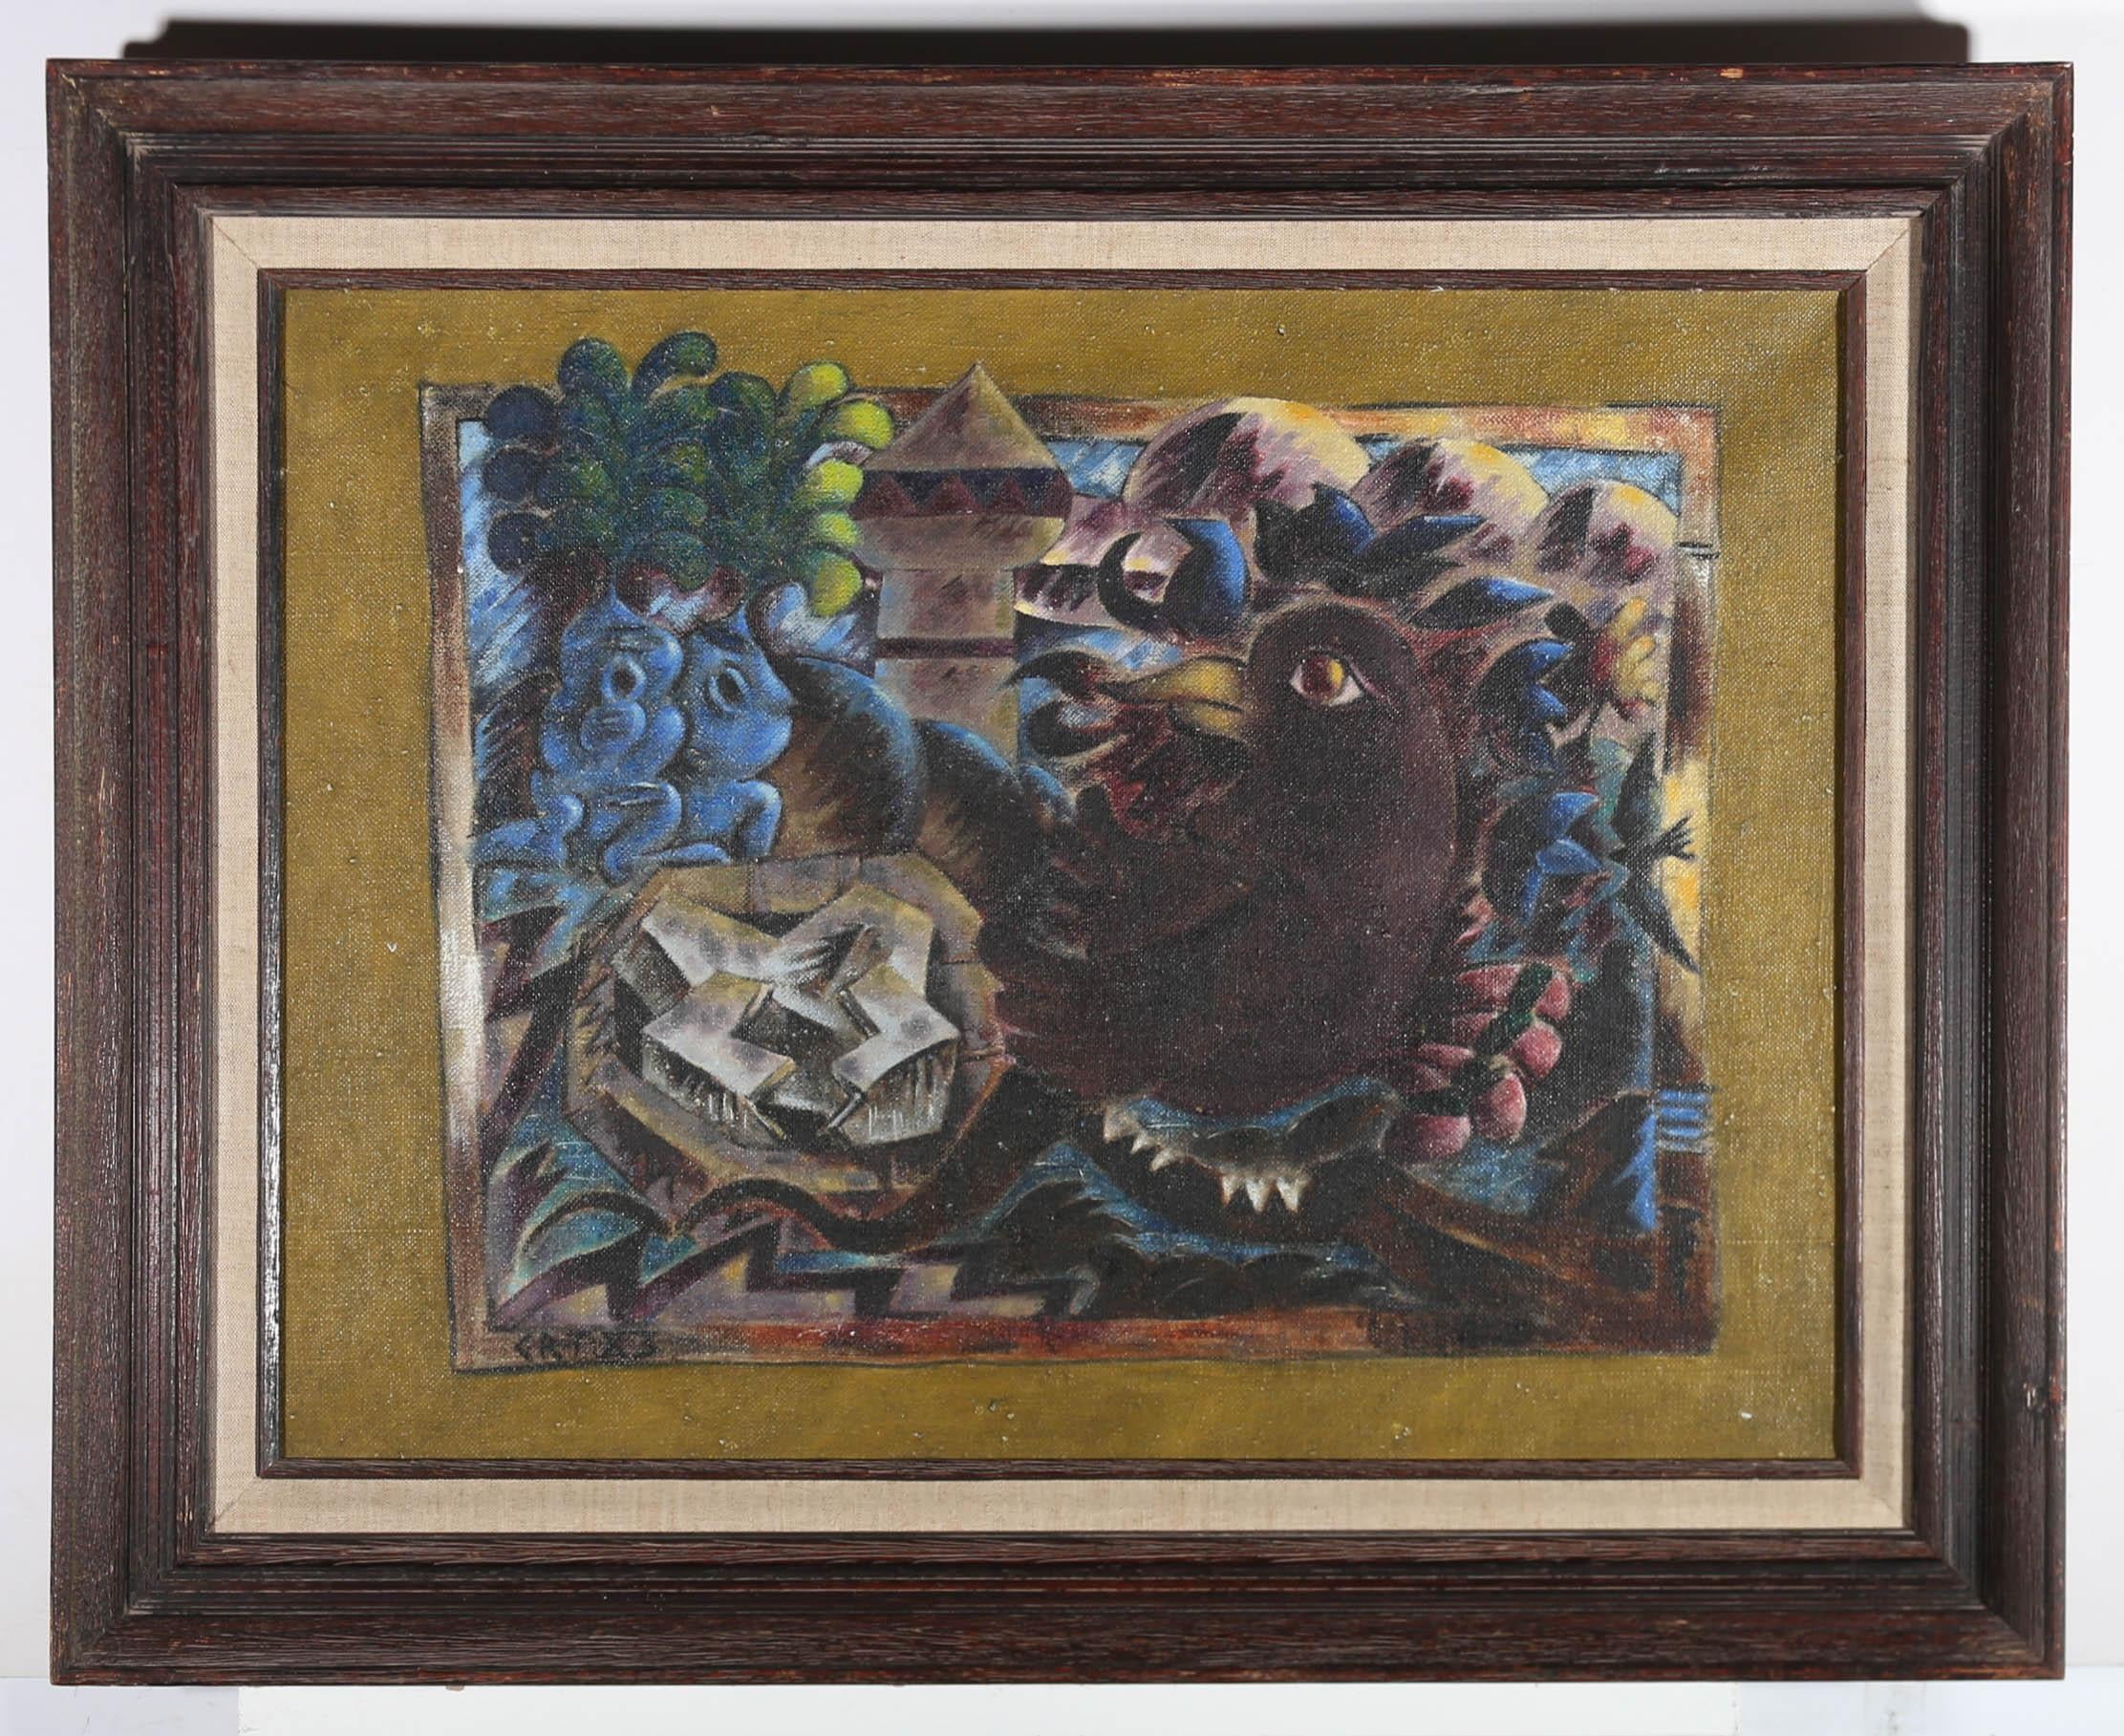 A striking and stylised 20th Century oil, showing a wide eyed black bird surrounded by fragmented towers, walls and strange blue and green plants. The artist has initialed and dated to the lower left corner and the painting has been presented in a